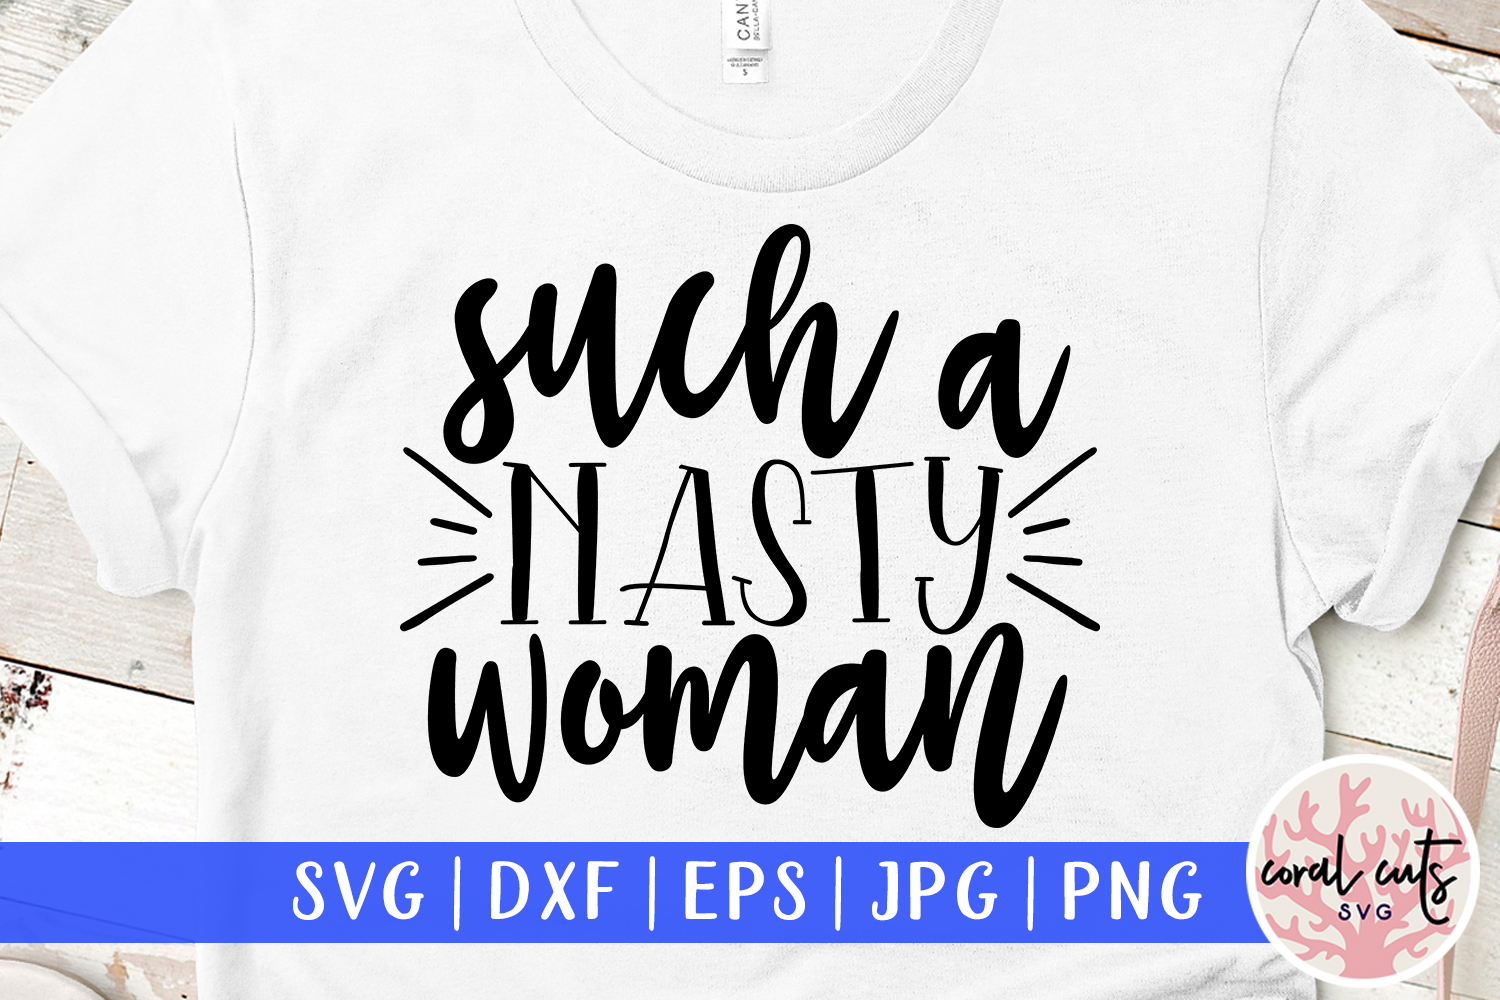 Download Such a nasty woman - Women Empowerment EPS SVG DXF PNG ...